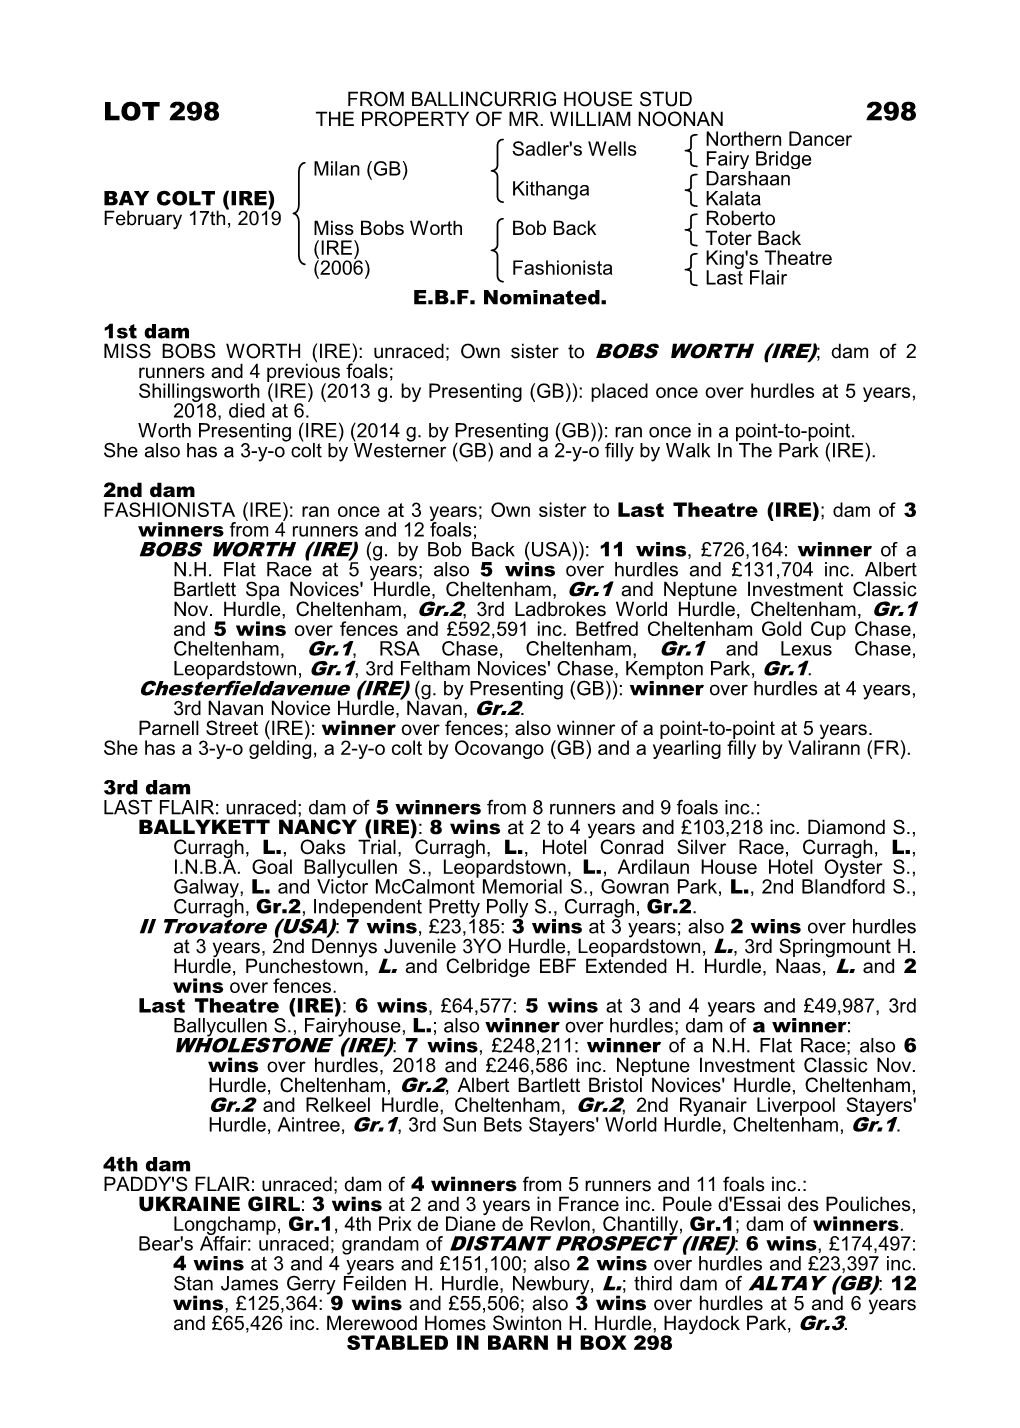 Lot 298 the Property of Mr